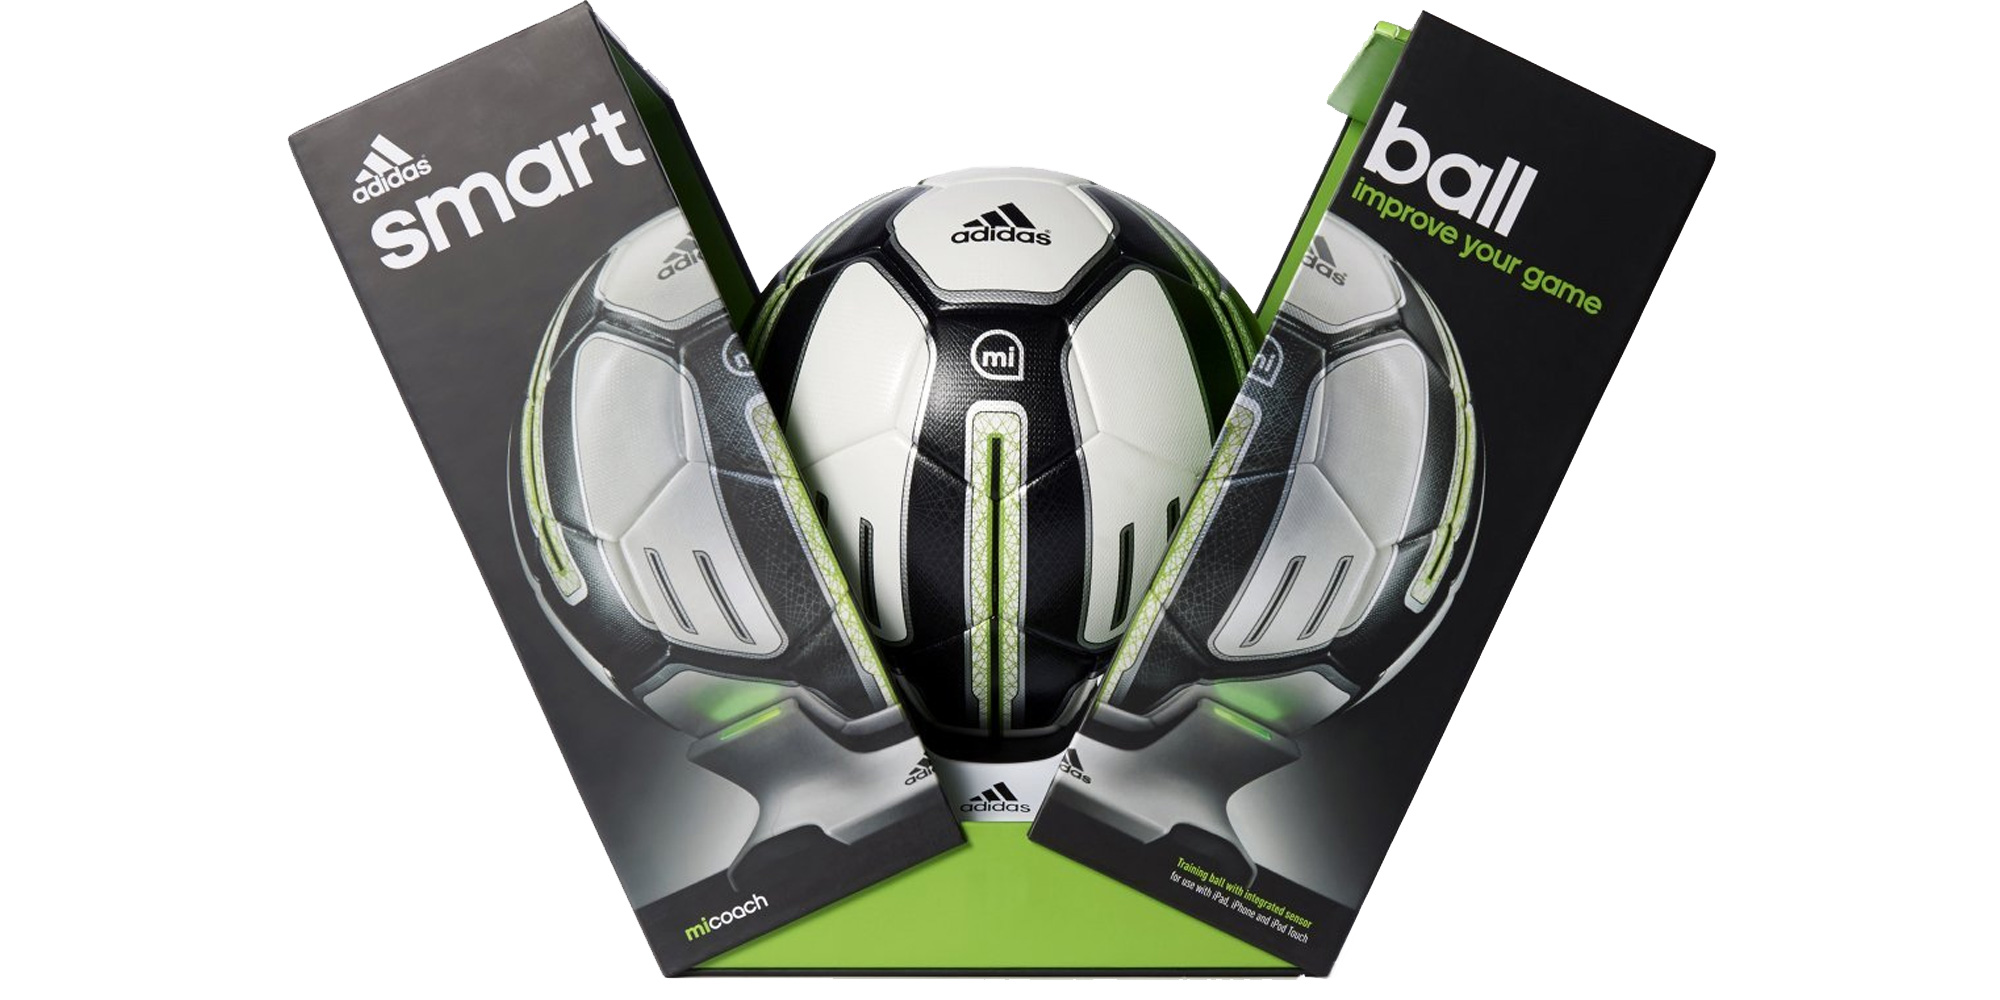 Develop your skills w/ an app-connected ball from Adidas for $70 (Reg. $200)